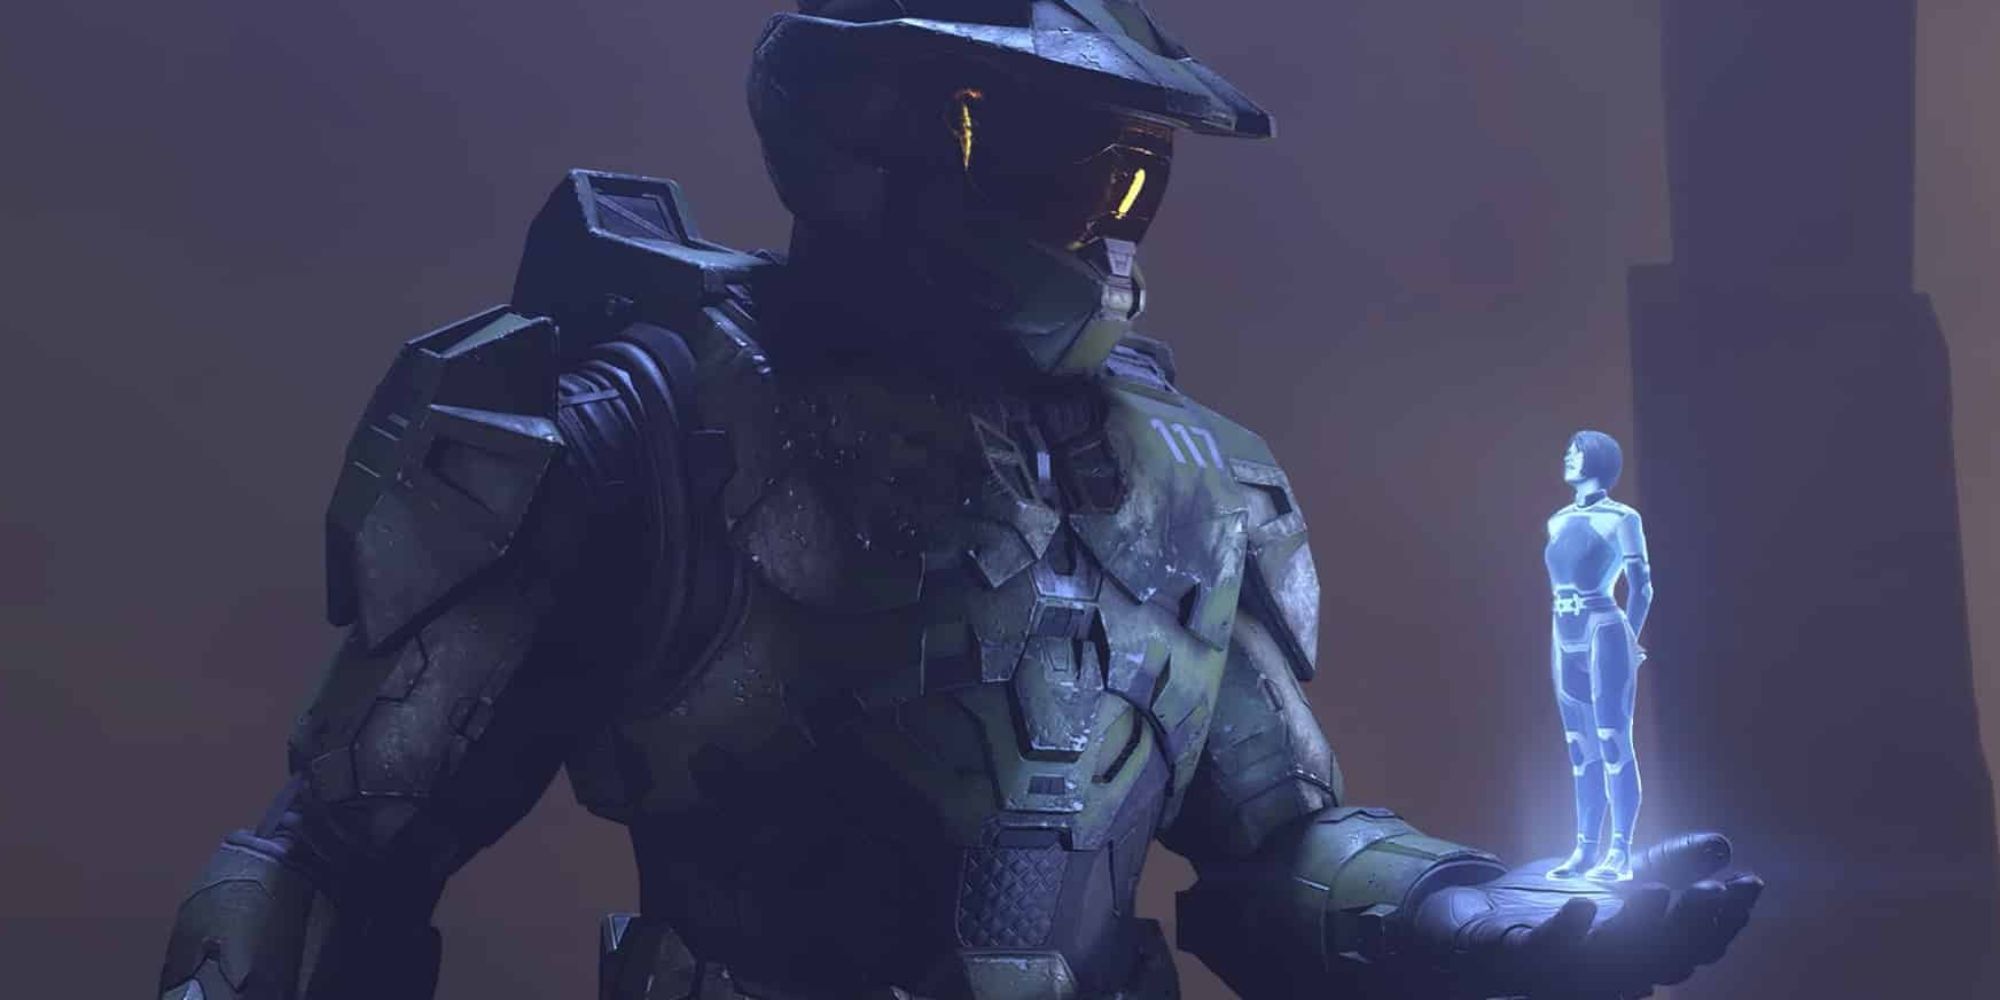 Halo's Master Chief and Cortana, Cortana is projecting from his hand. 